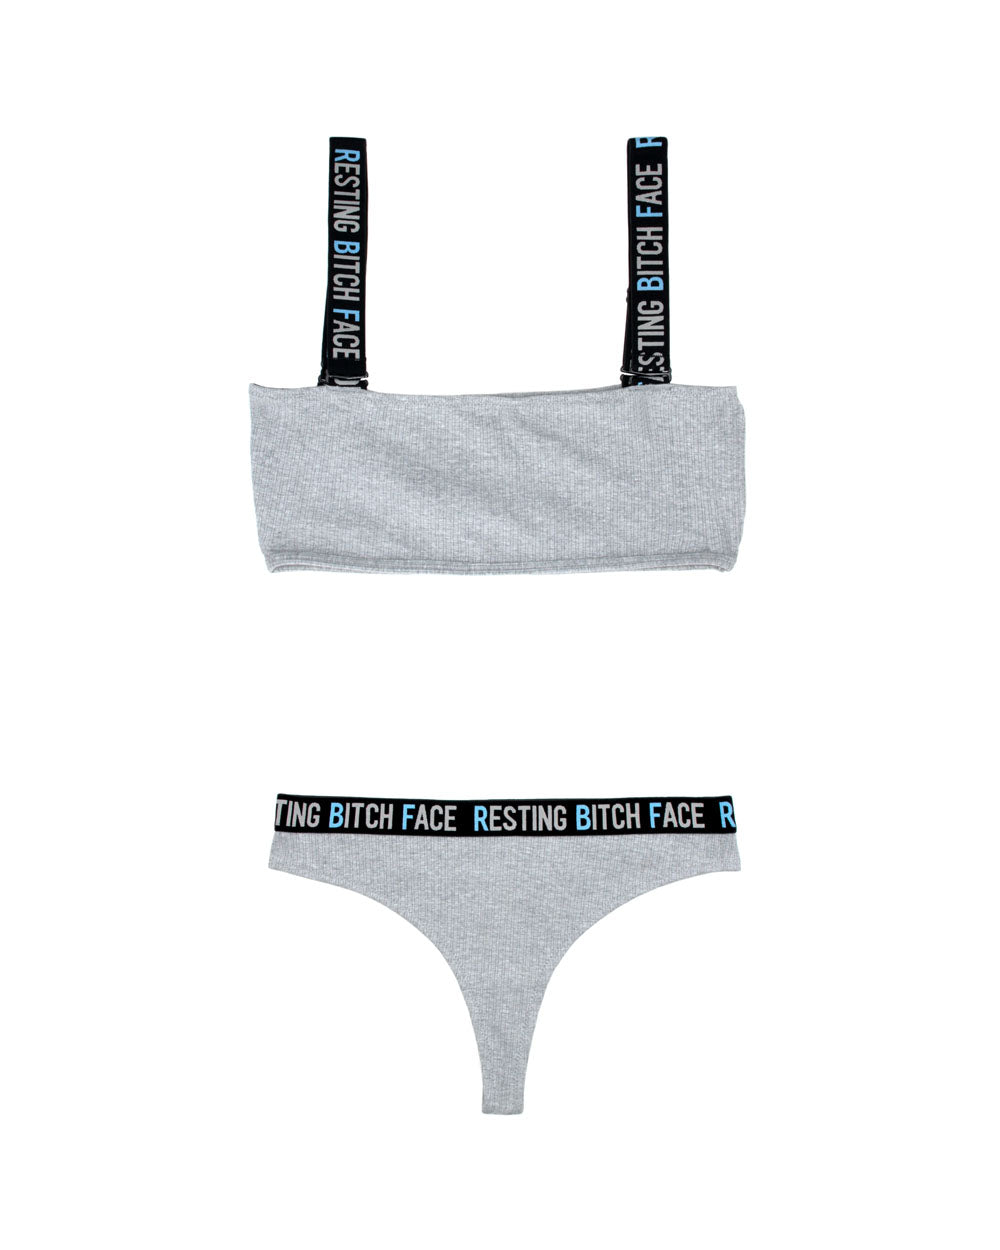 Resting Bitch Face Crop Top and Thong Panty Set - Gray - L-xl